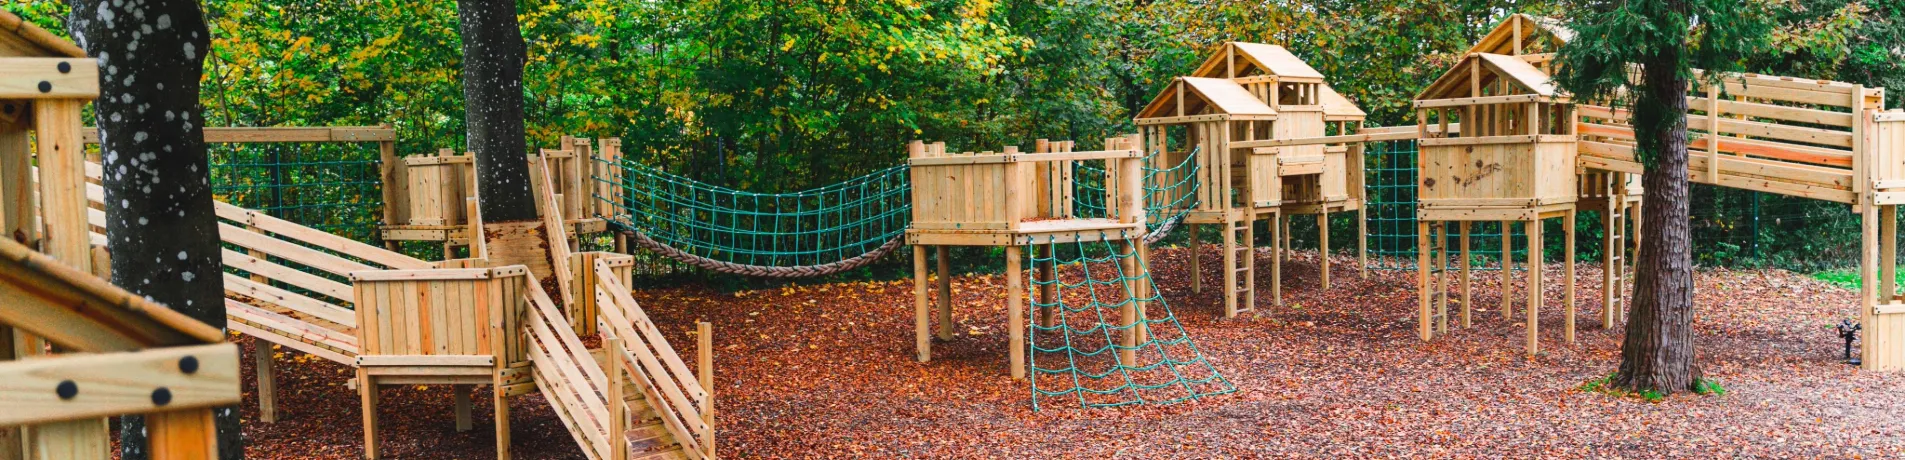 Special Education Needs and Disabilities school playgrounds